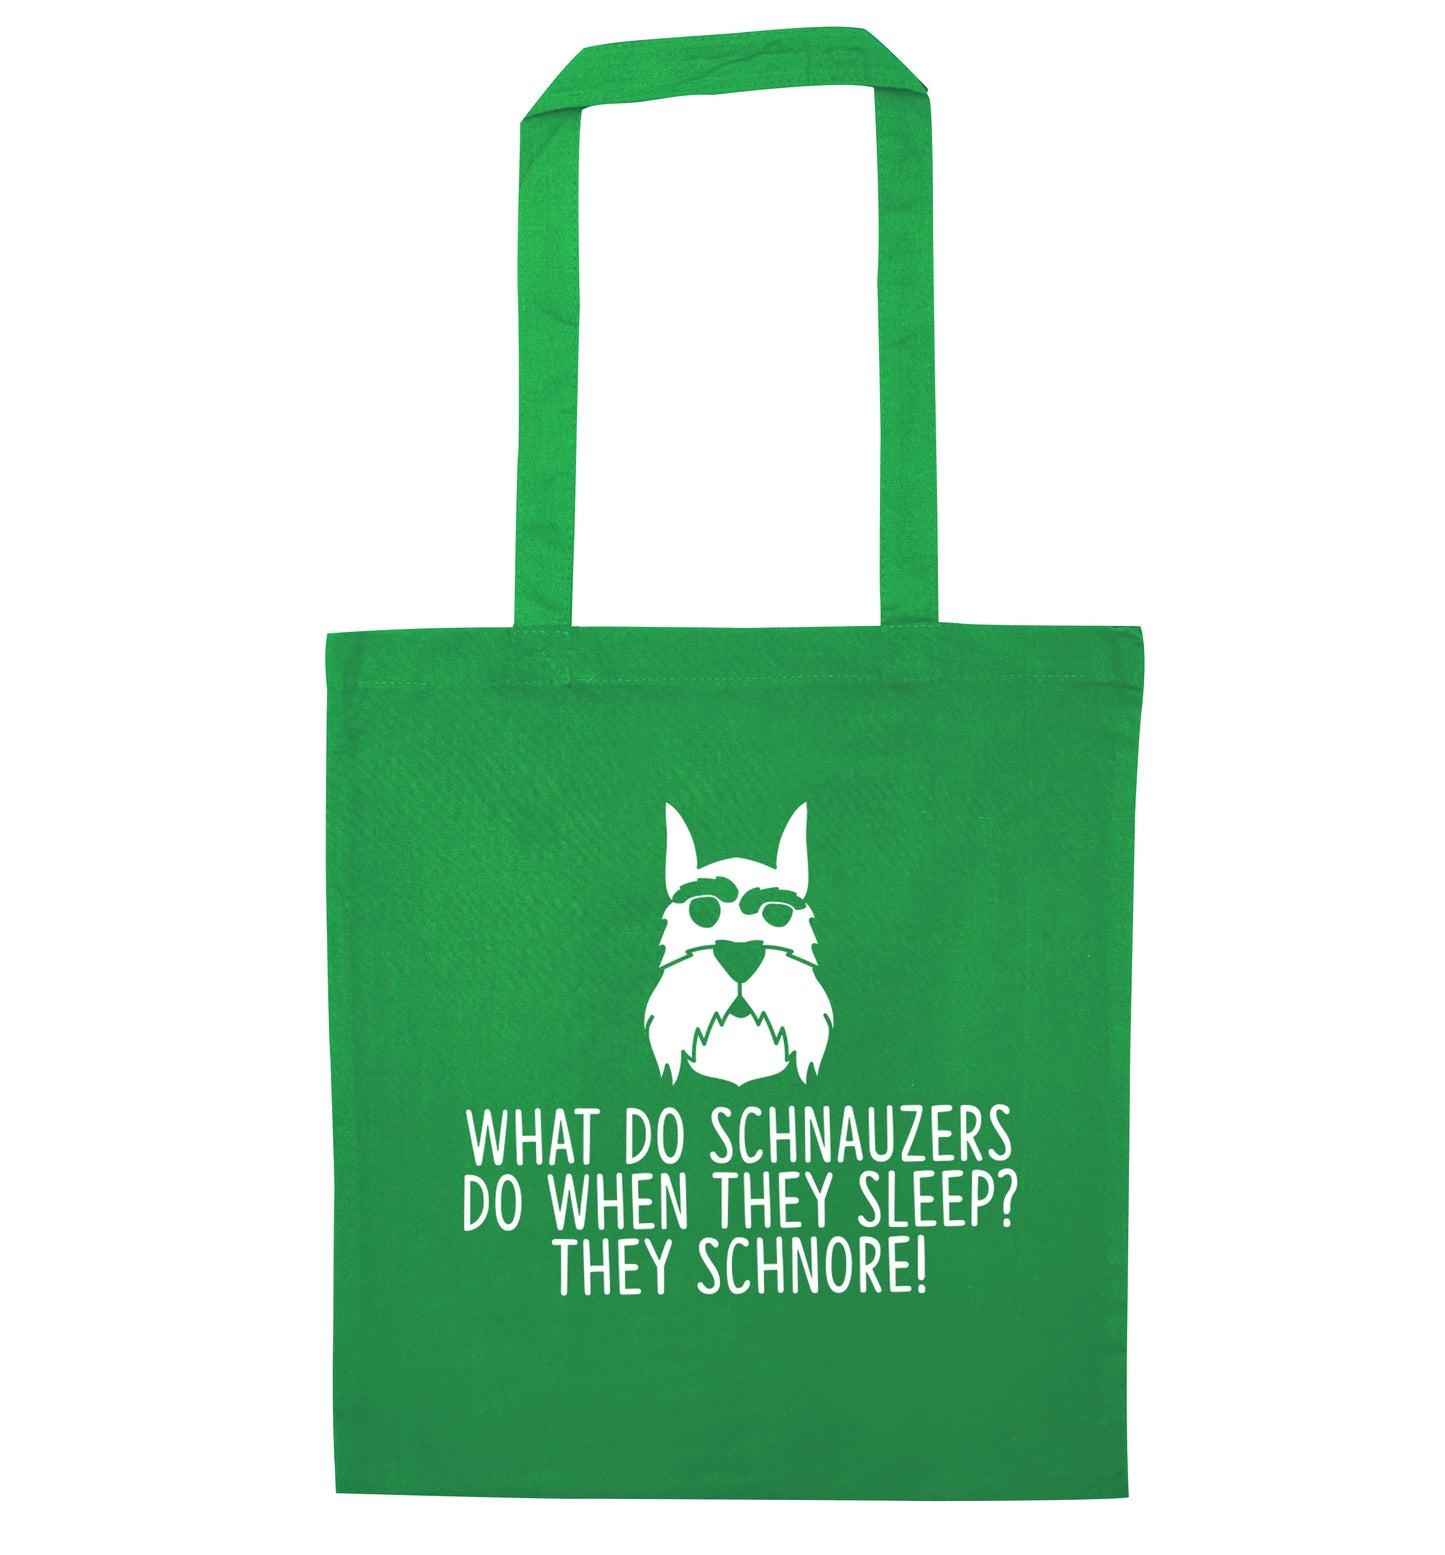 What do schnauzers do when they sleep? Schnore! green tote bag